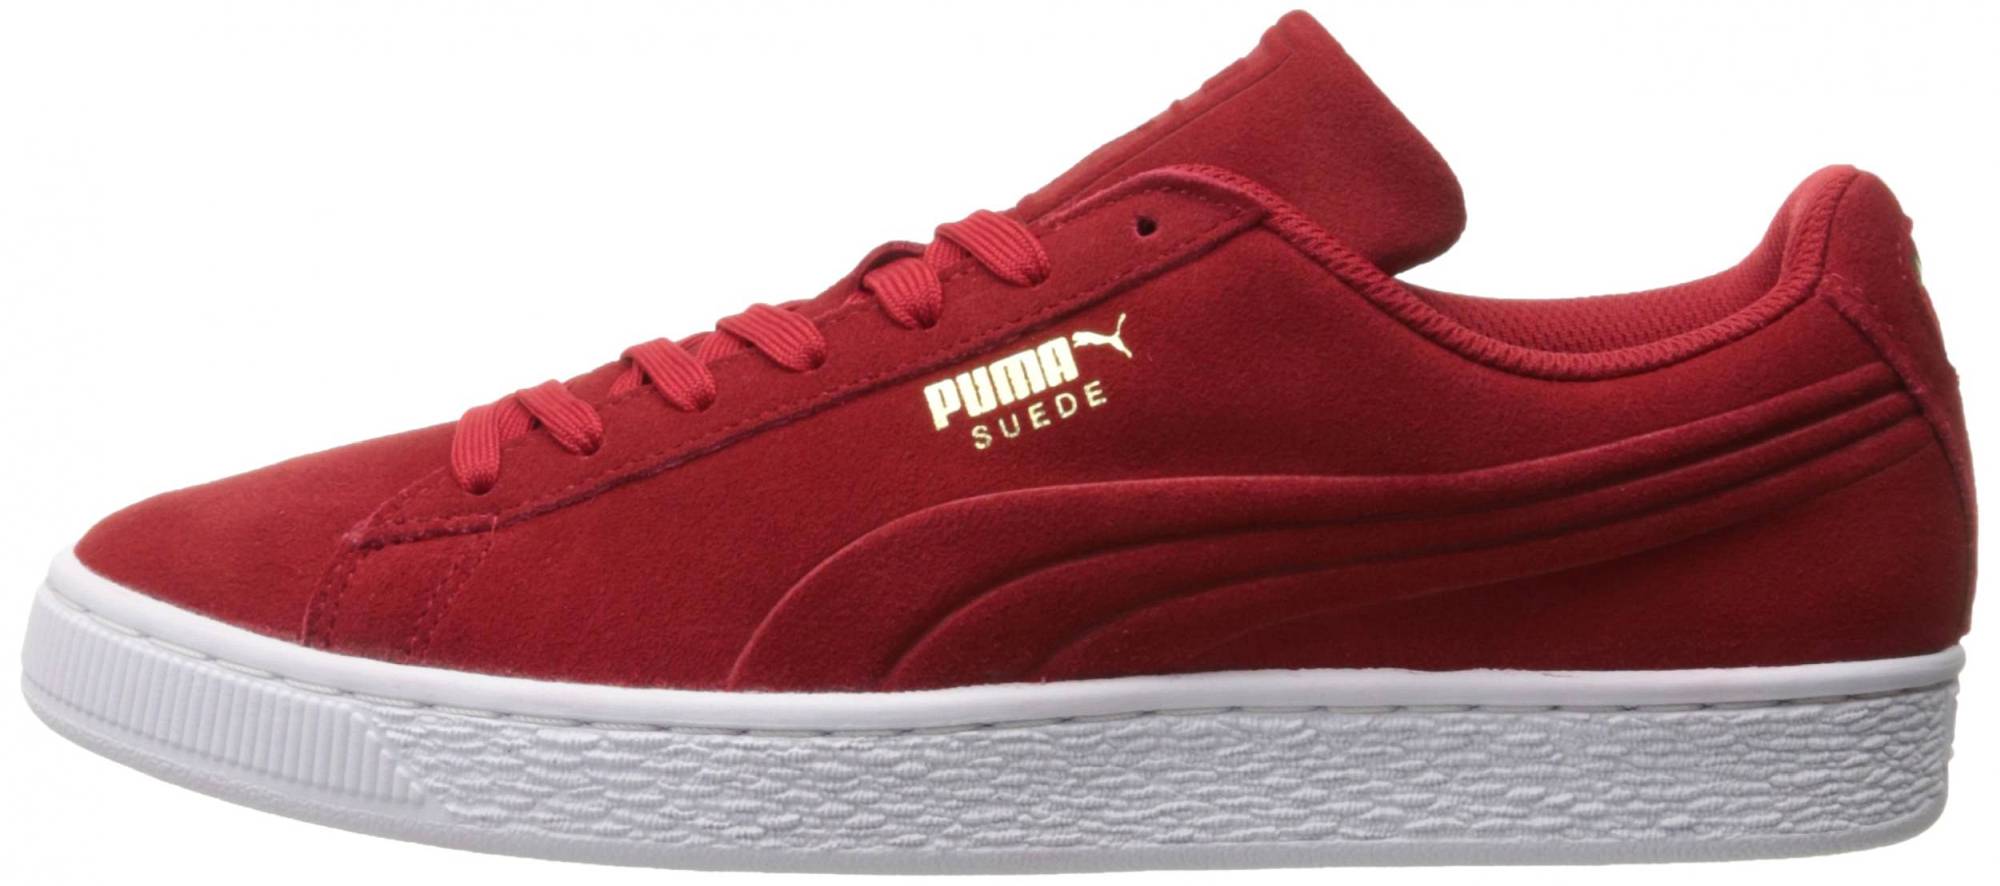 Puma Suede Classic Debossed – Shoes Reviews & Reasons To Buy